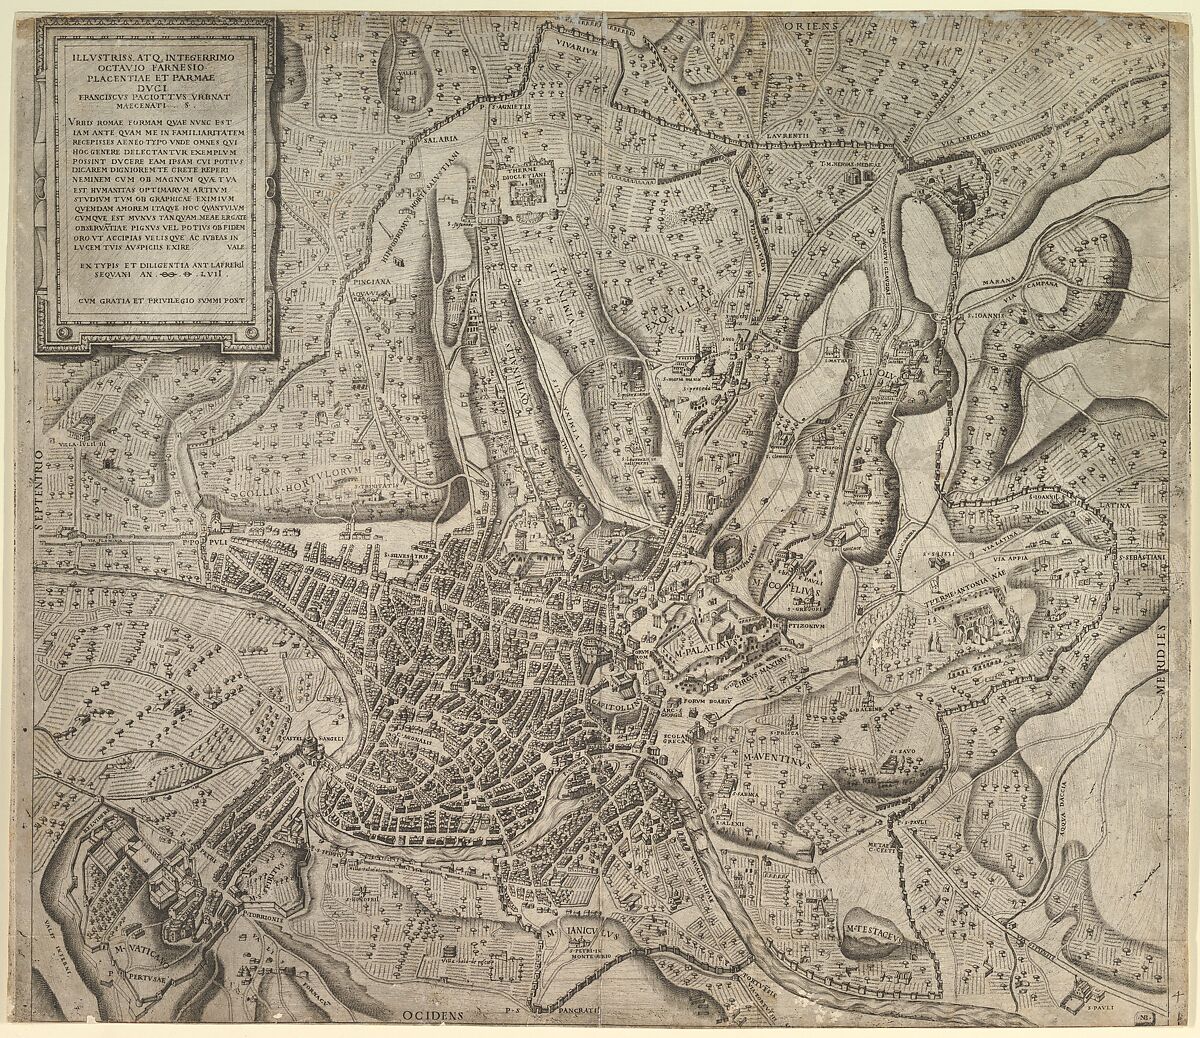 View of Rome from the West, from "Speculum Romanae Magnificentiae", Nicolas Beatrizet (French, Lunéville 1515–ca. 1566 Rome (?)), Engraving 